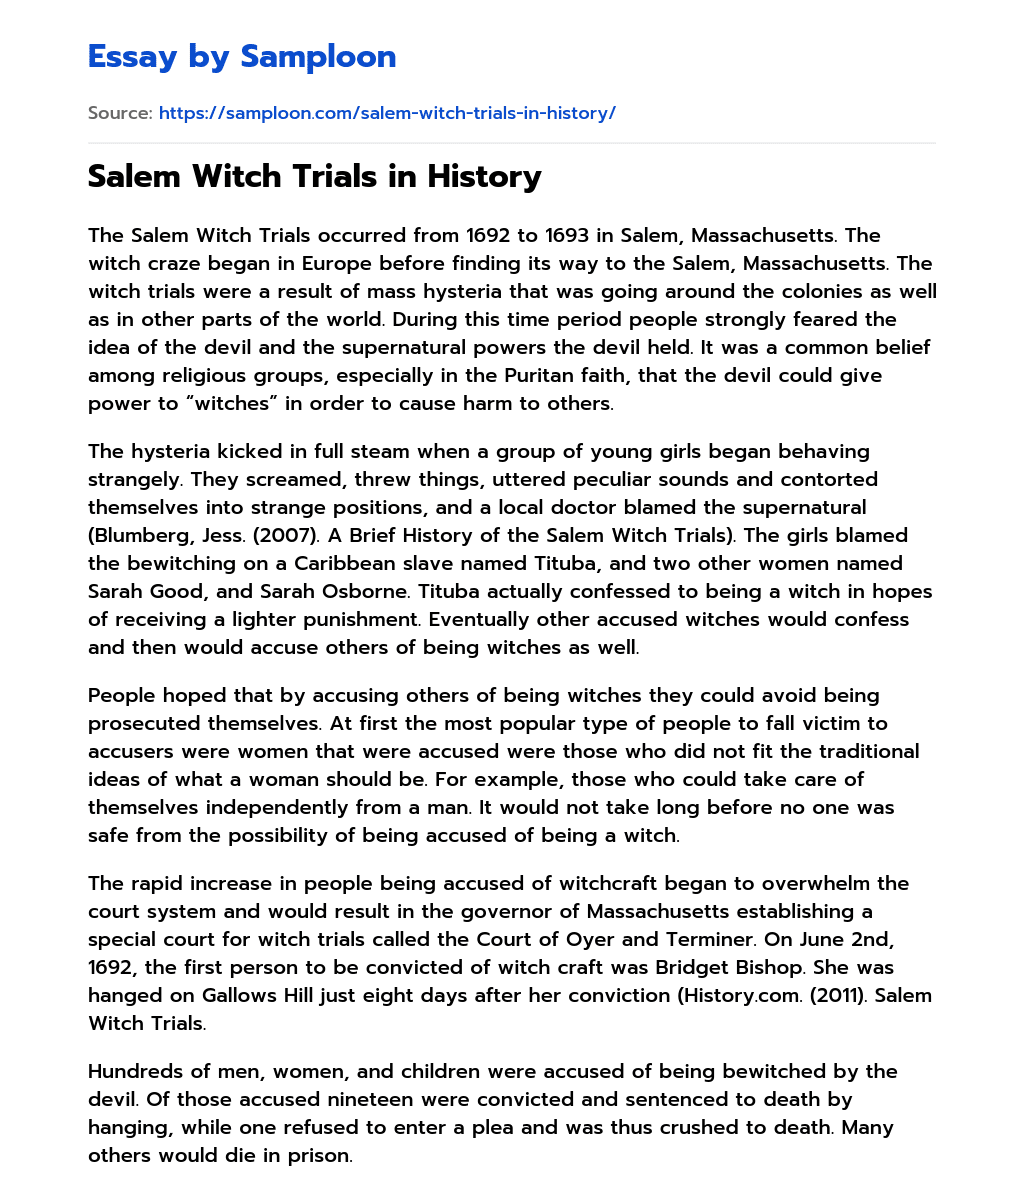 Salem Witch Trials in History essay